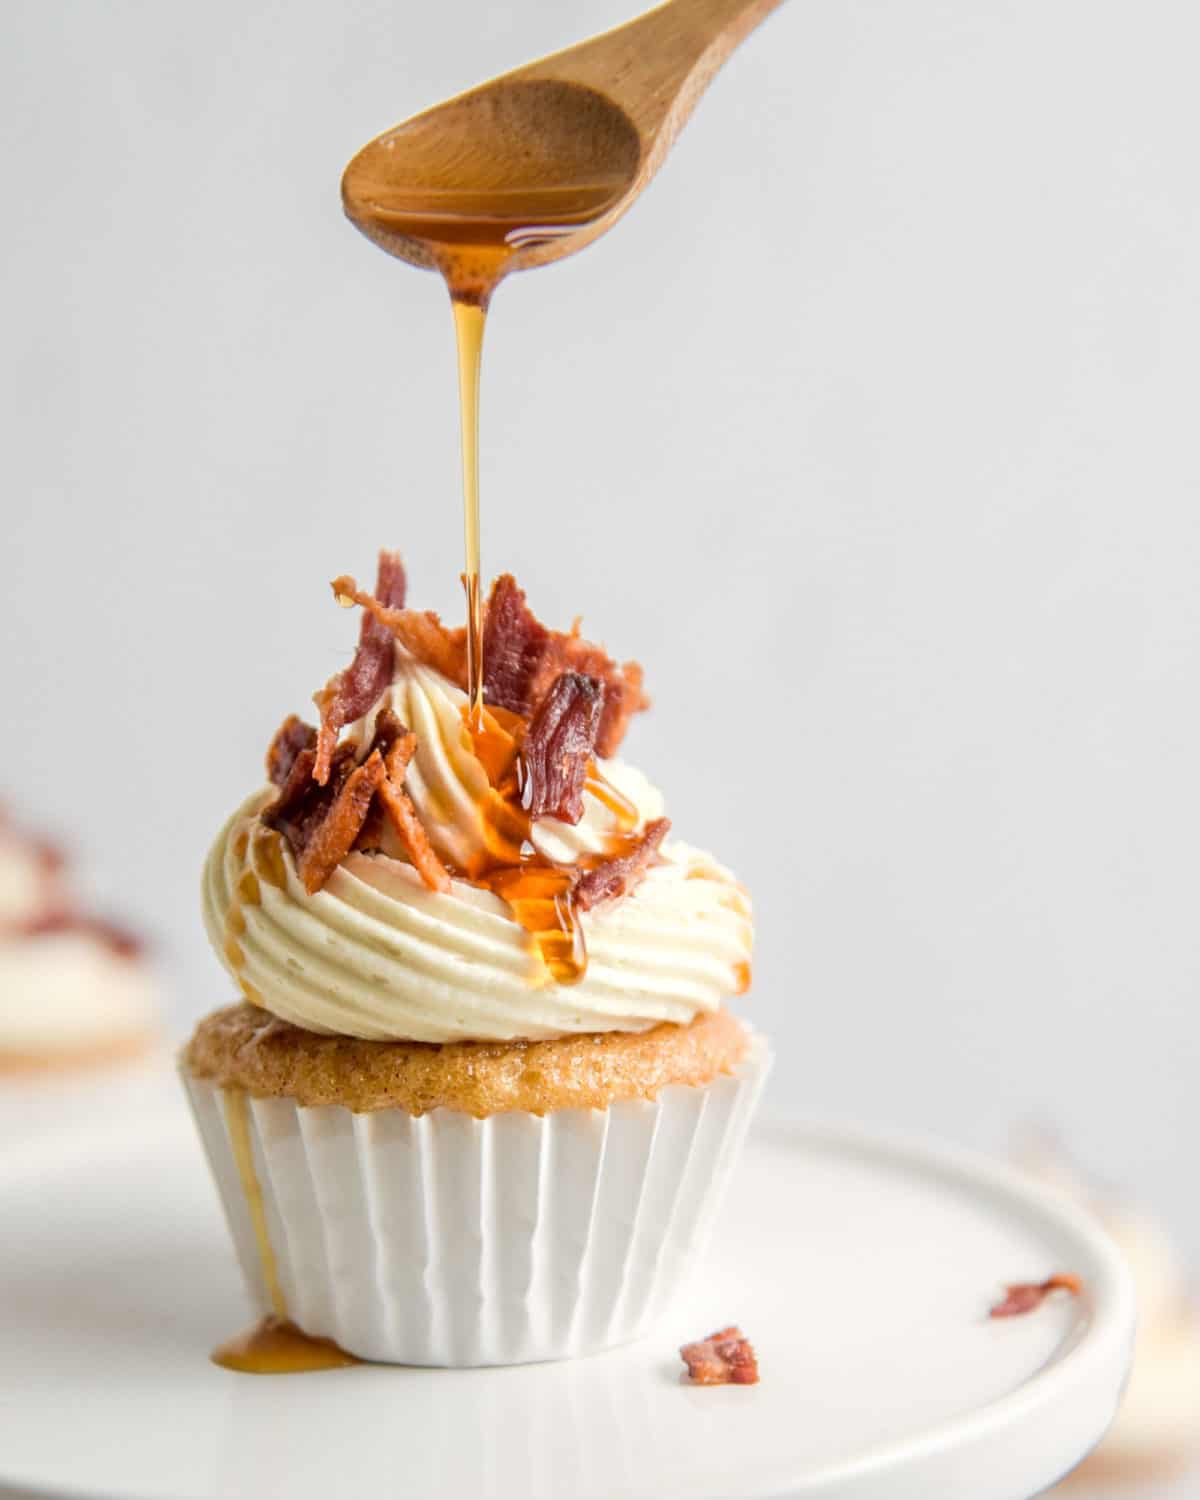 Dripping maple syrup onto the top of a cupcake with a wooden spoon.